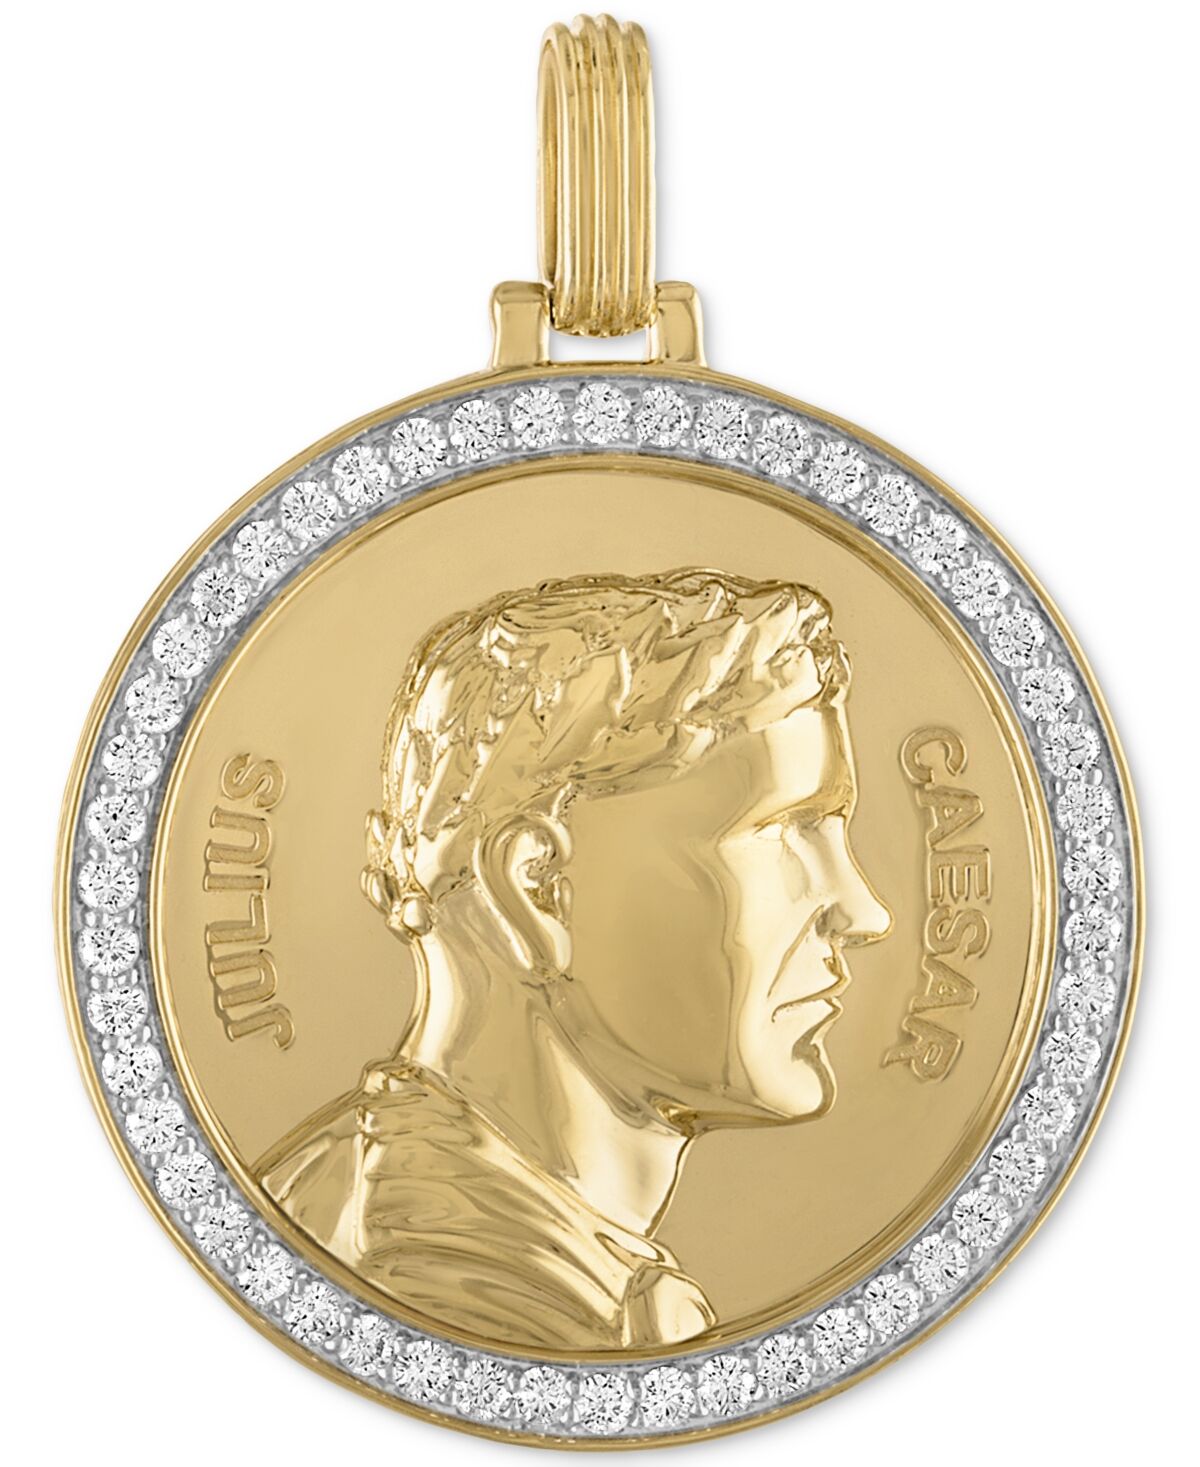 Esquire Men's Jewelry Cubic Zirconia Julius Caesar Coin Pendant in Sterling Silver & 14k Gold-Plate, Created for Macy's - Gold Over Silver